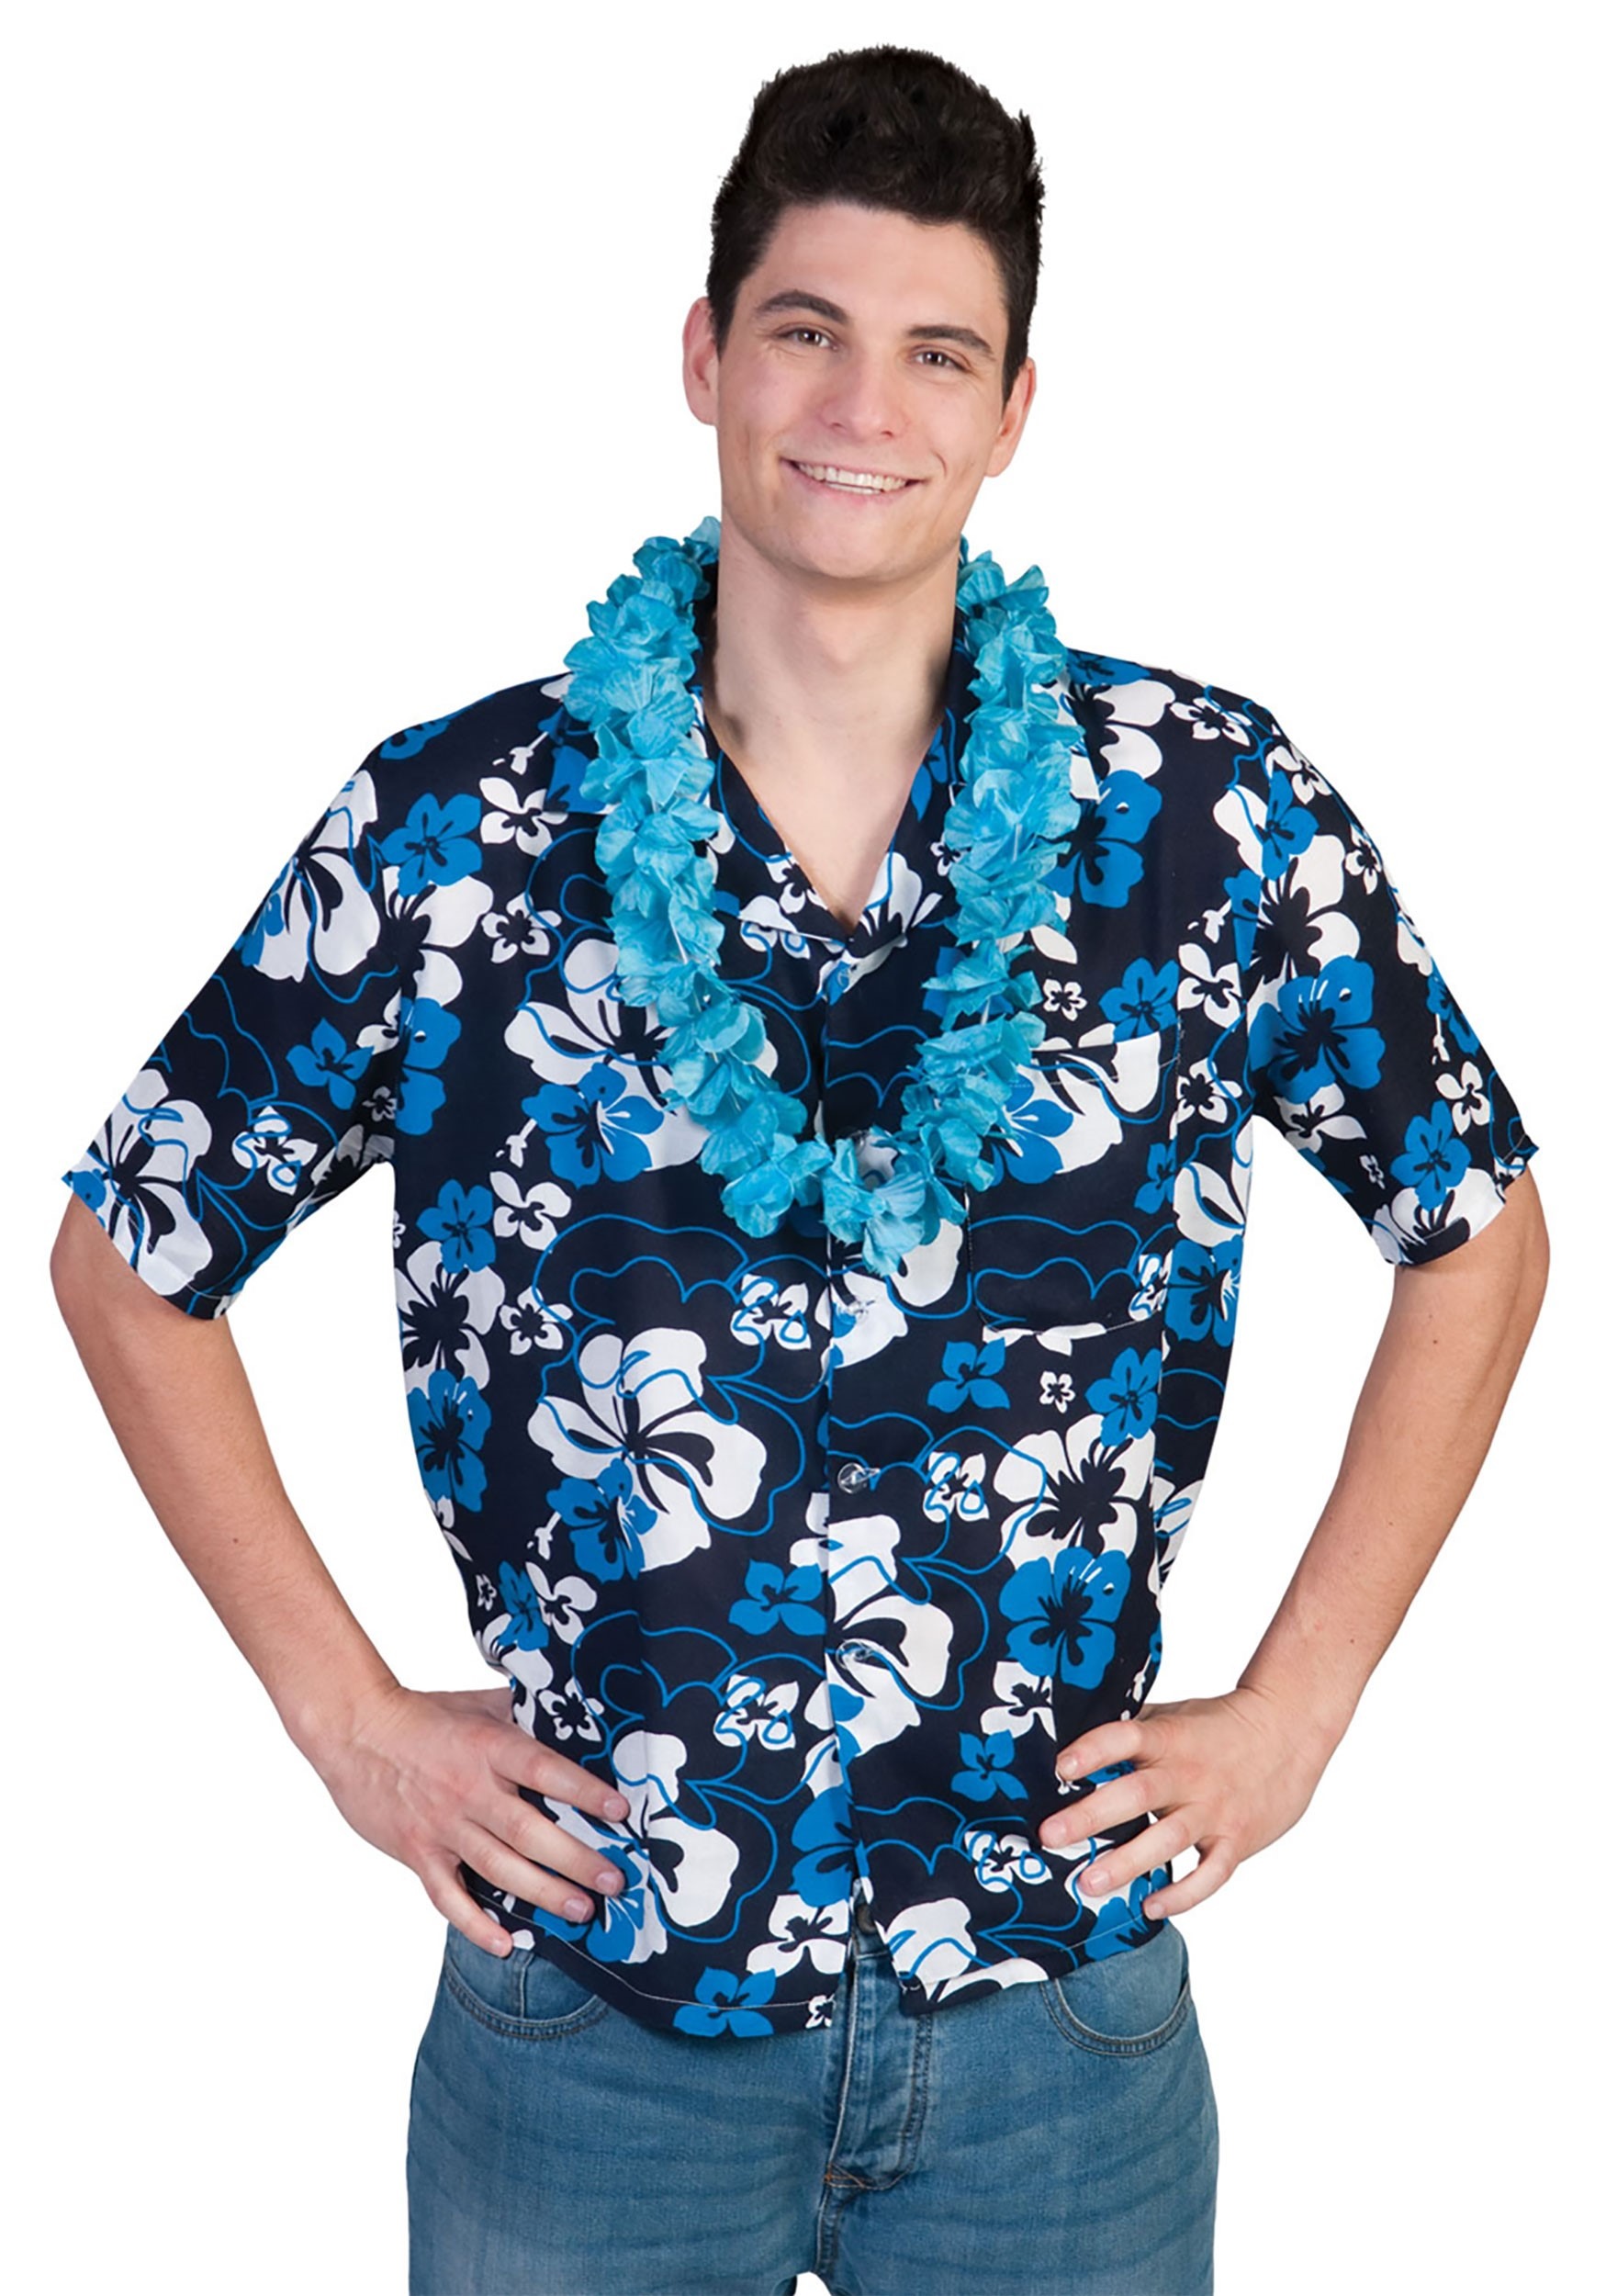 From the Beach to the Party : Our Hawaiian Shirts Will Take You